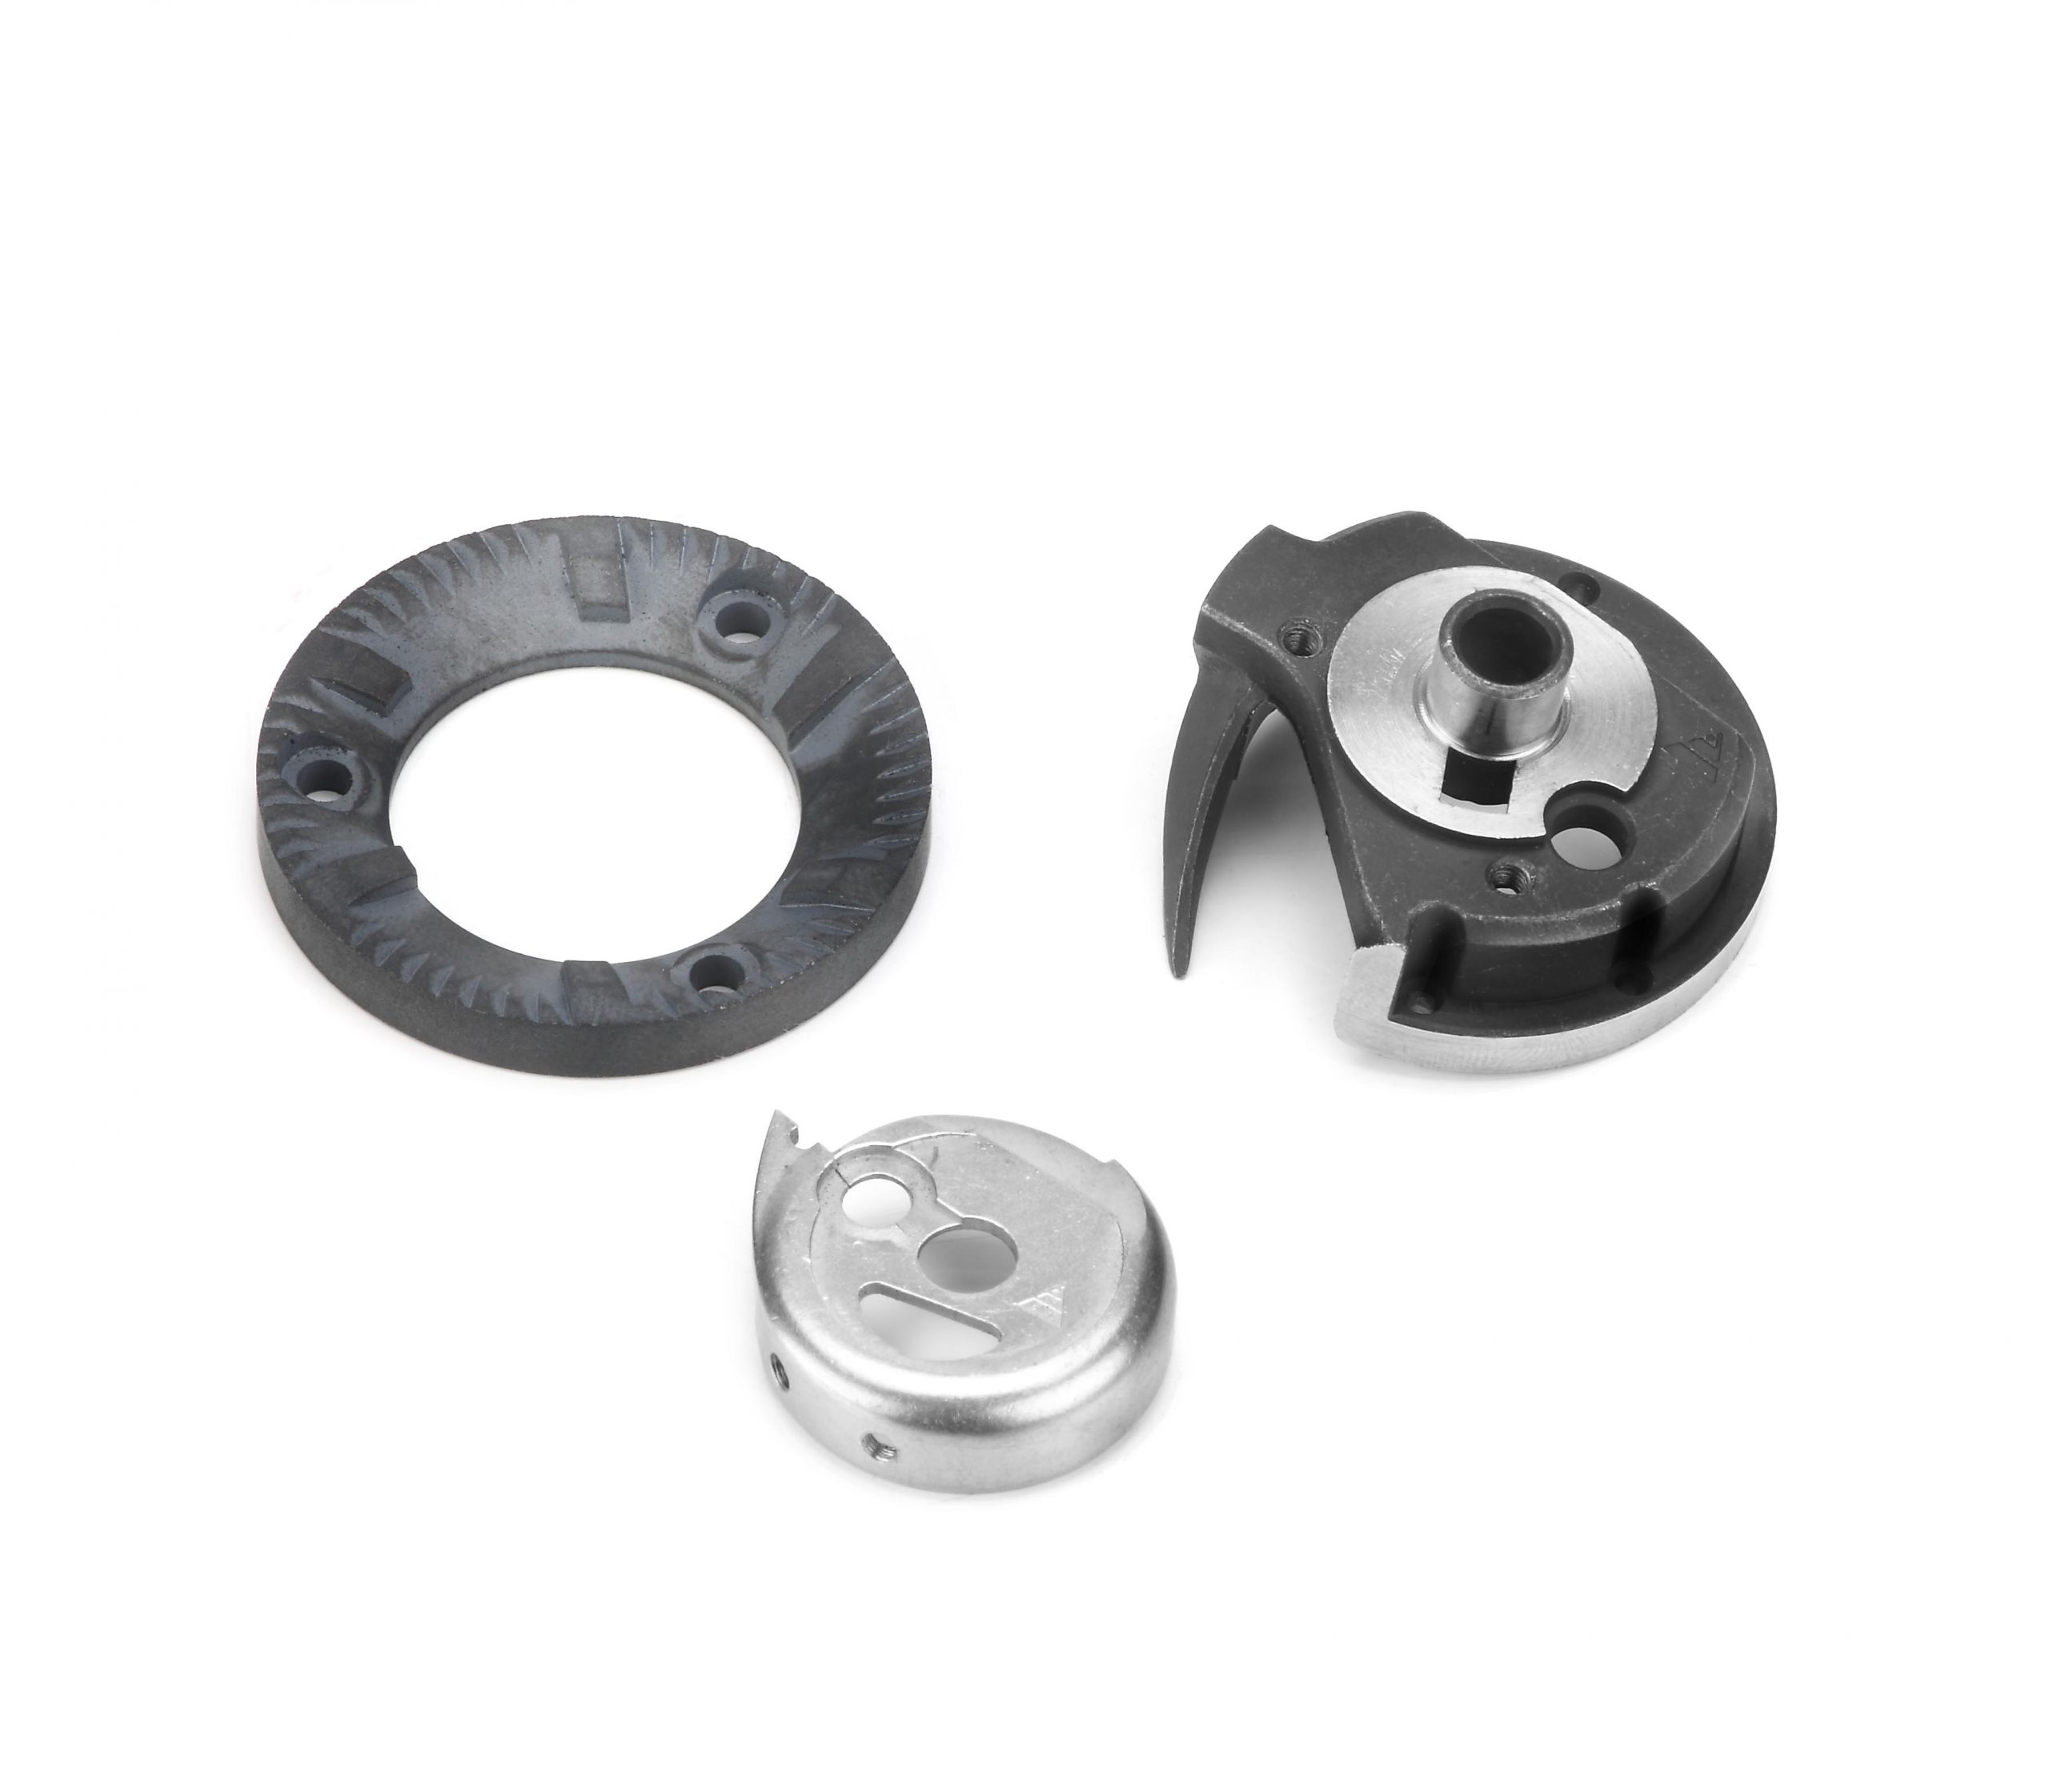 Sintered Sewing Machine Components